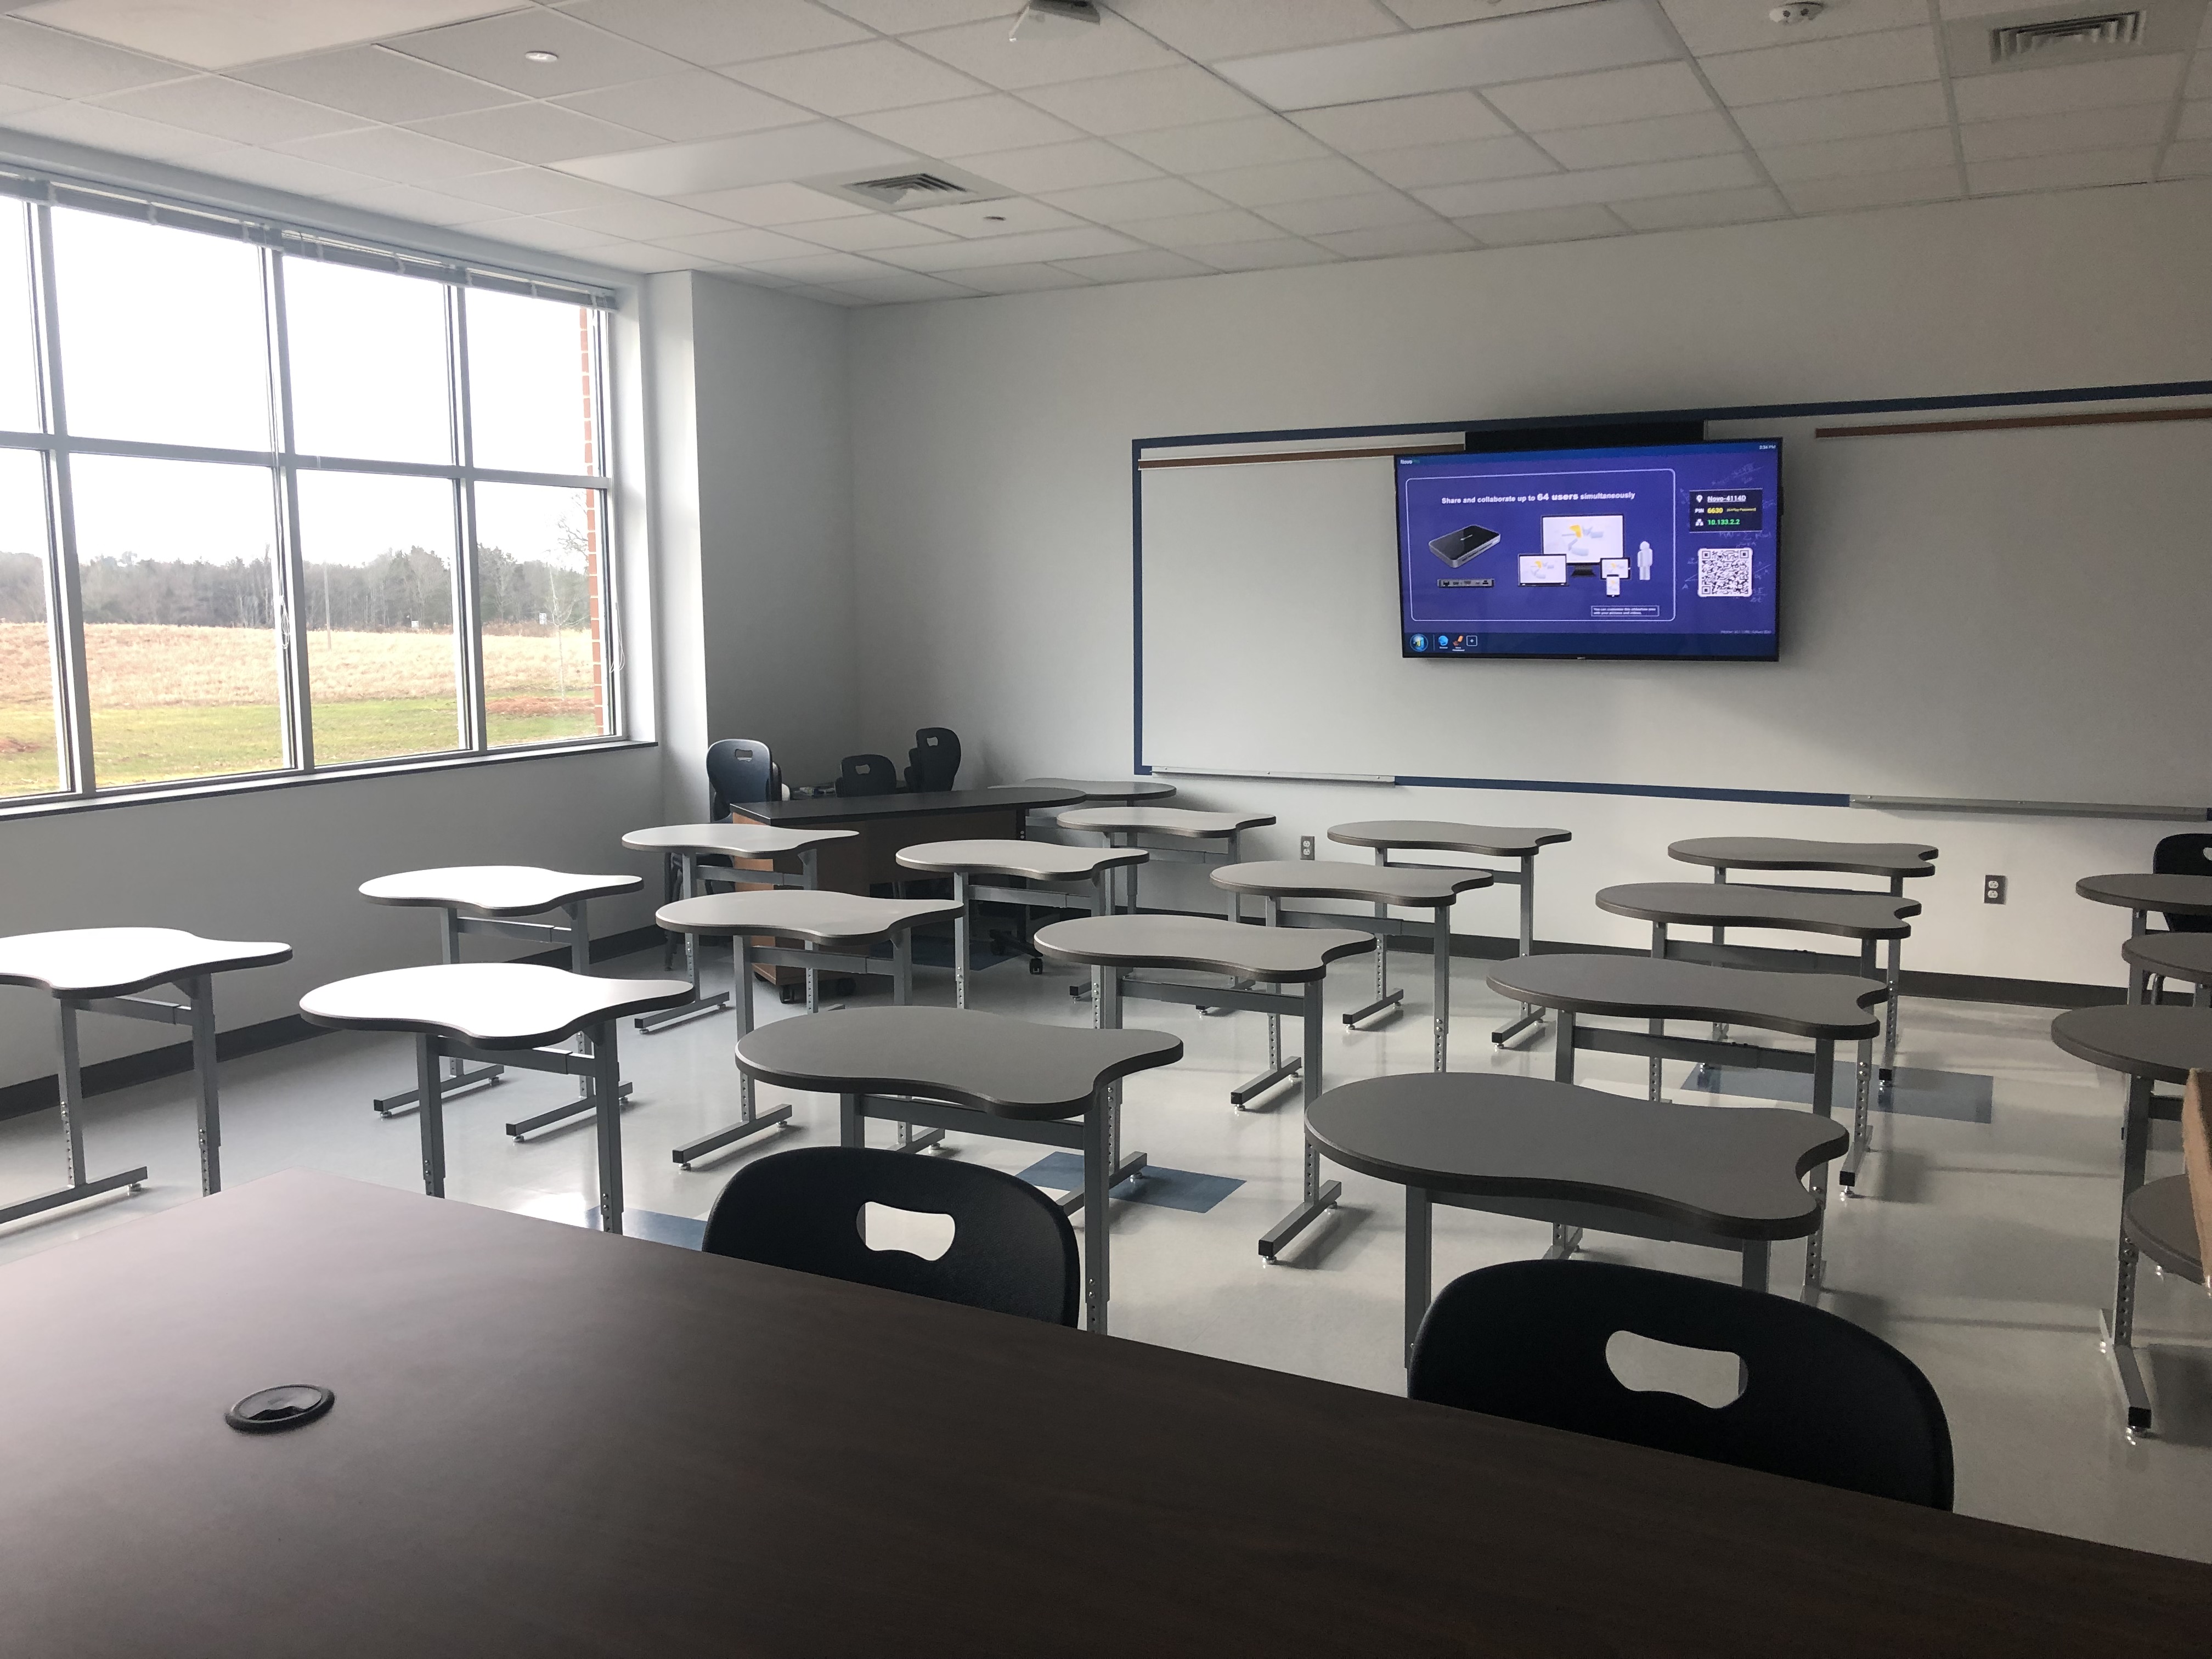 Classroom area of the Performance Learning Center